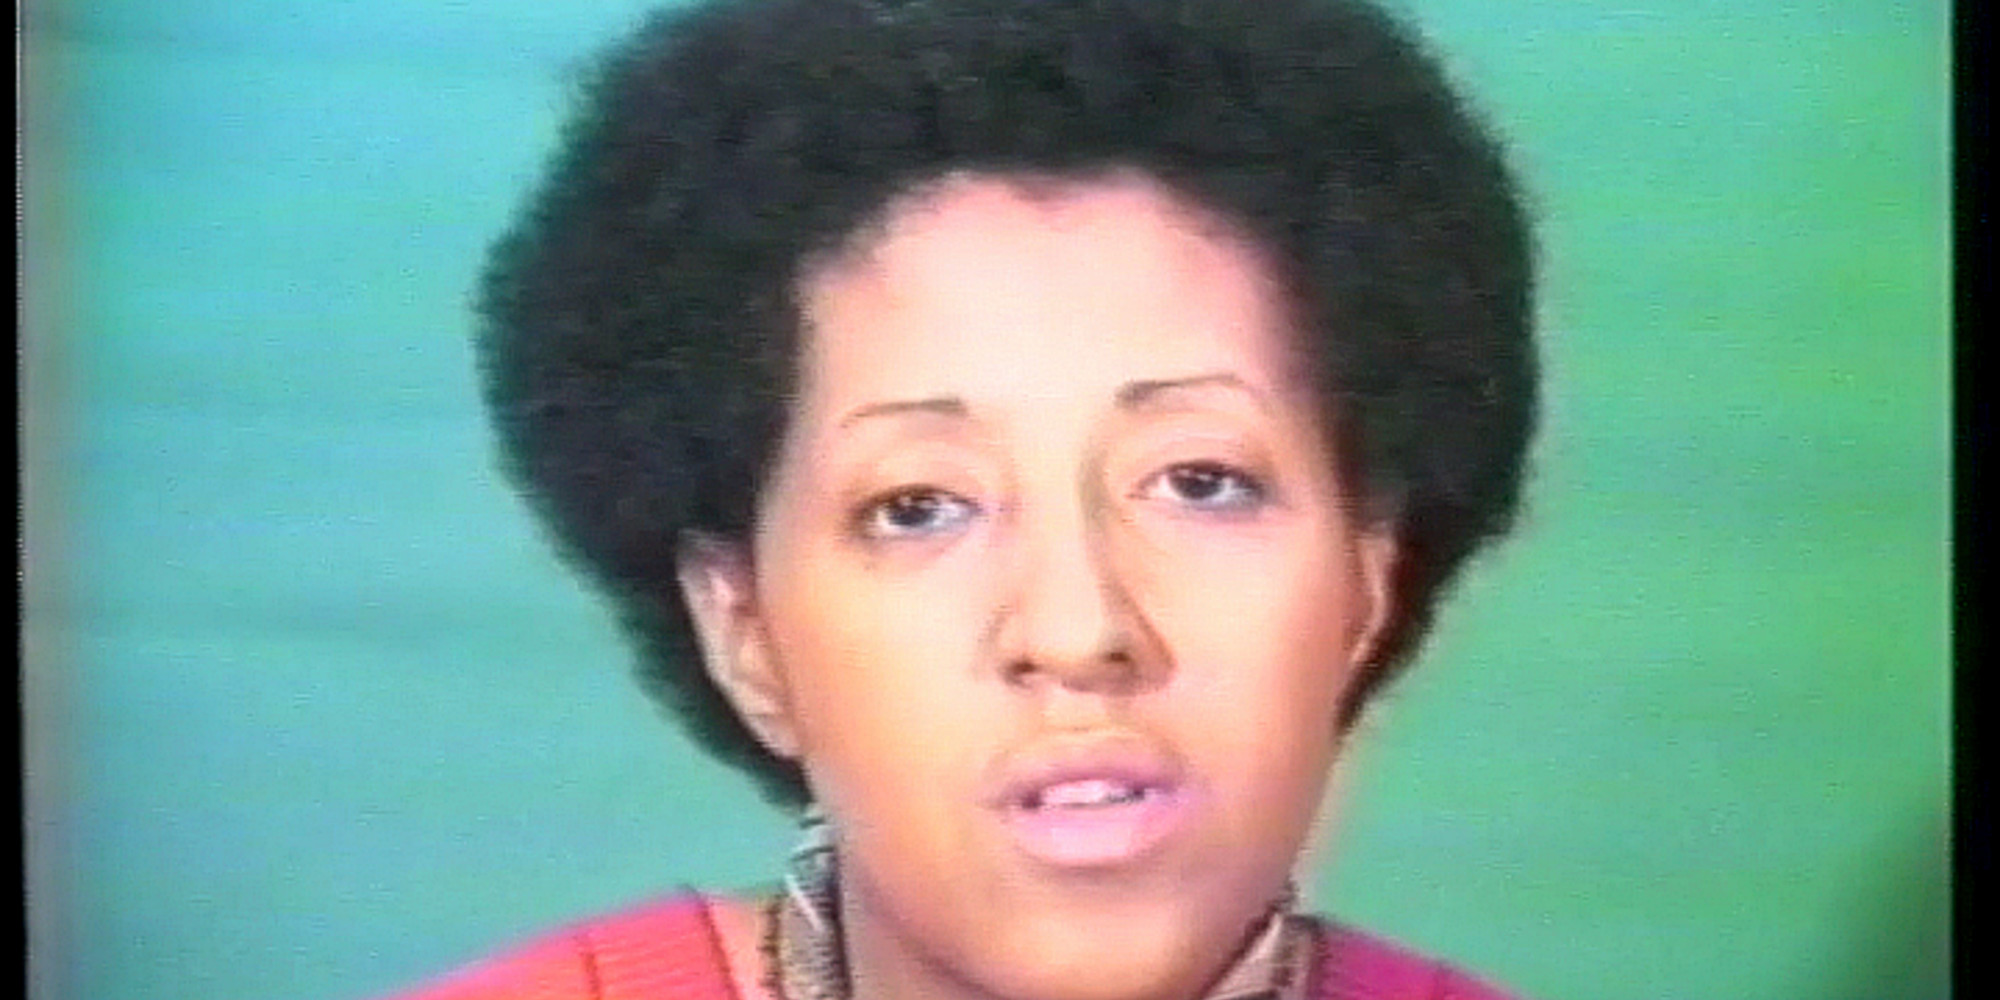 Howardena Pindell. Free, White and 21. 1980. Video (color, sound), 12:15 min. Gift of Jerry I. Speyer and Katherine G. Farley, Anna Marie and Robert F. Shapiro, and Marie-Josée and Henry R. Kravis. © 2019 Howardena Pindell. Courtesy of the artist and The Kitchen, New York